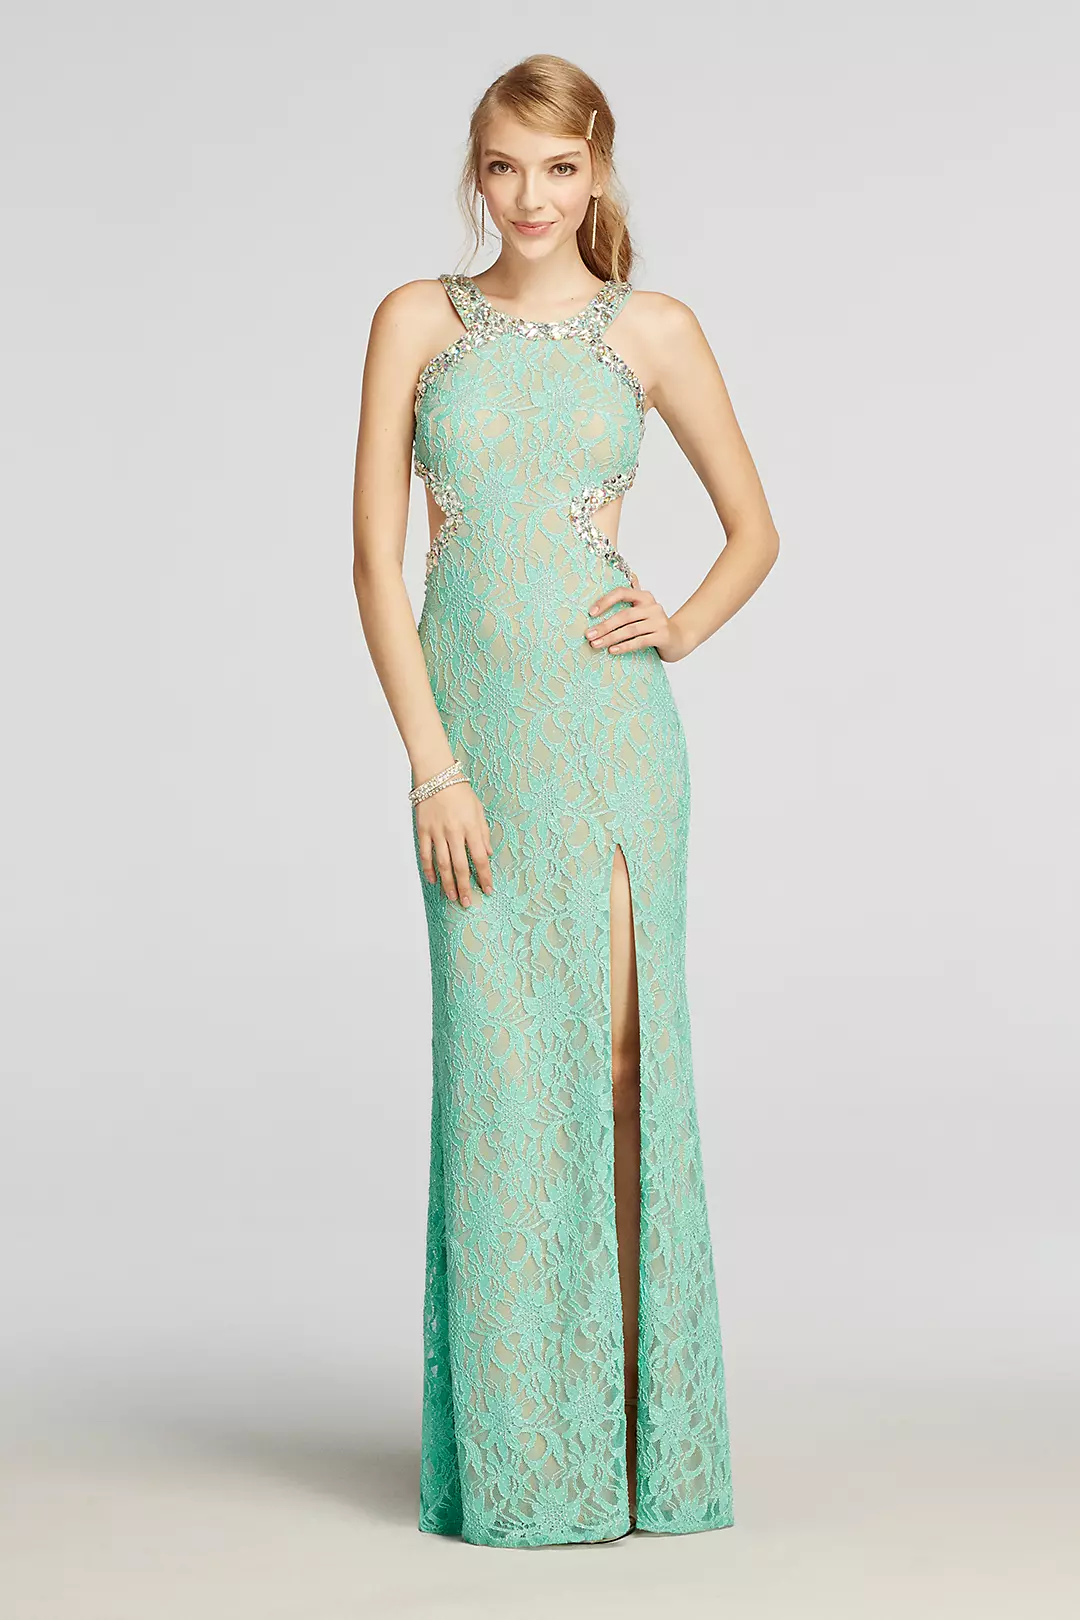 Halter Lace Prom Dress with Beaded Cut Outs Image